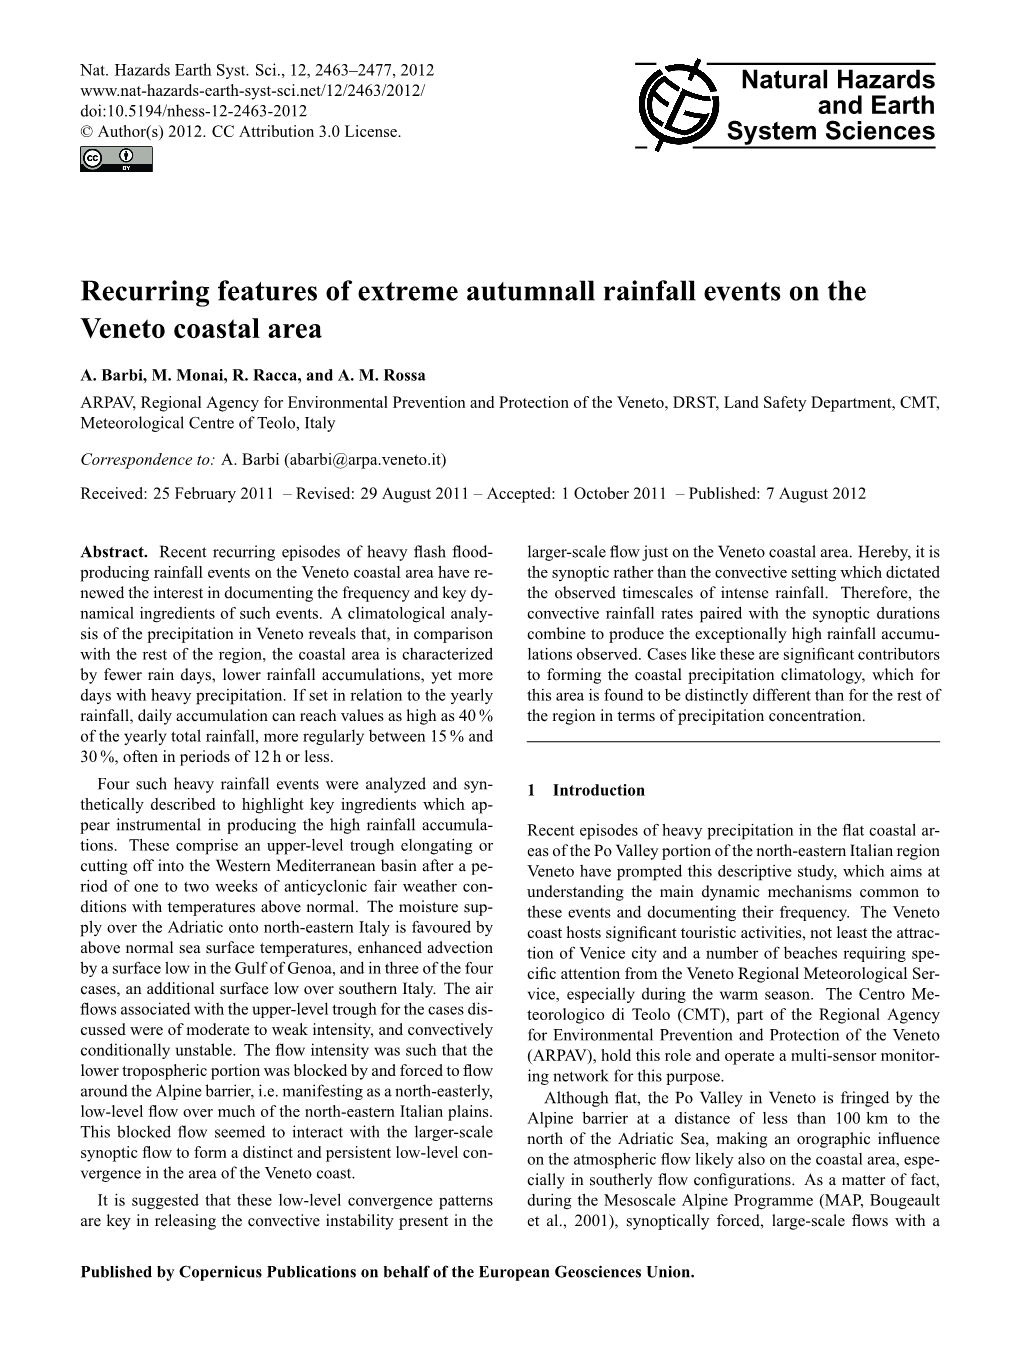 Recurring Features of Extreme Autumnall Rainfall Events on the Veneto Coastal Area